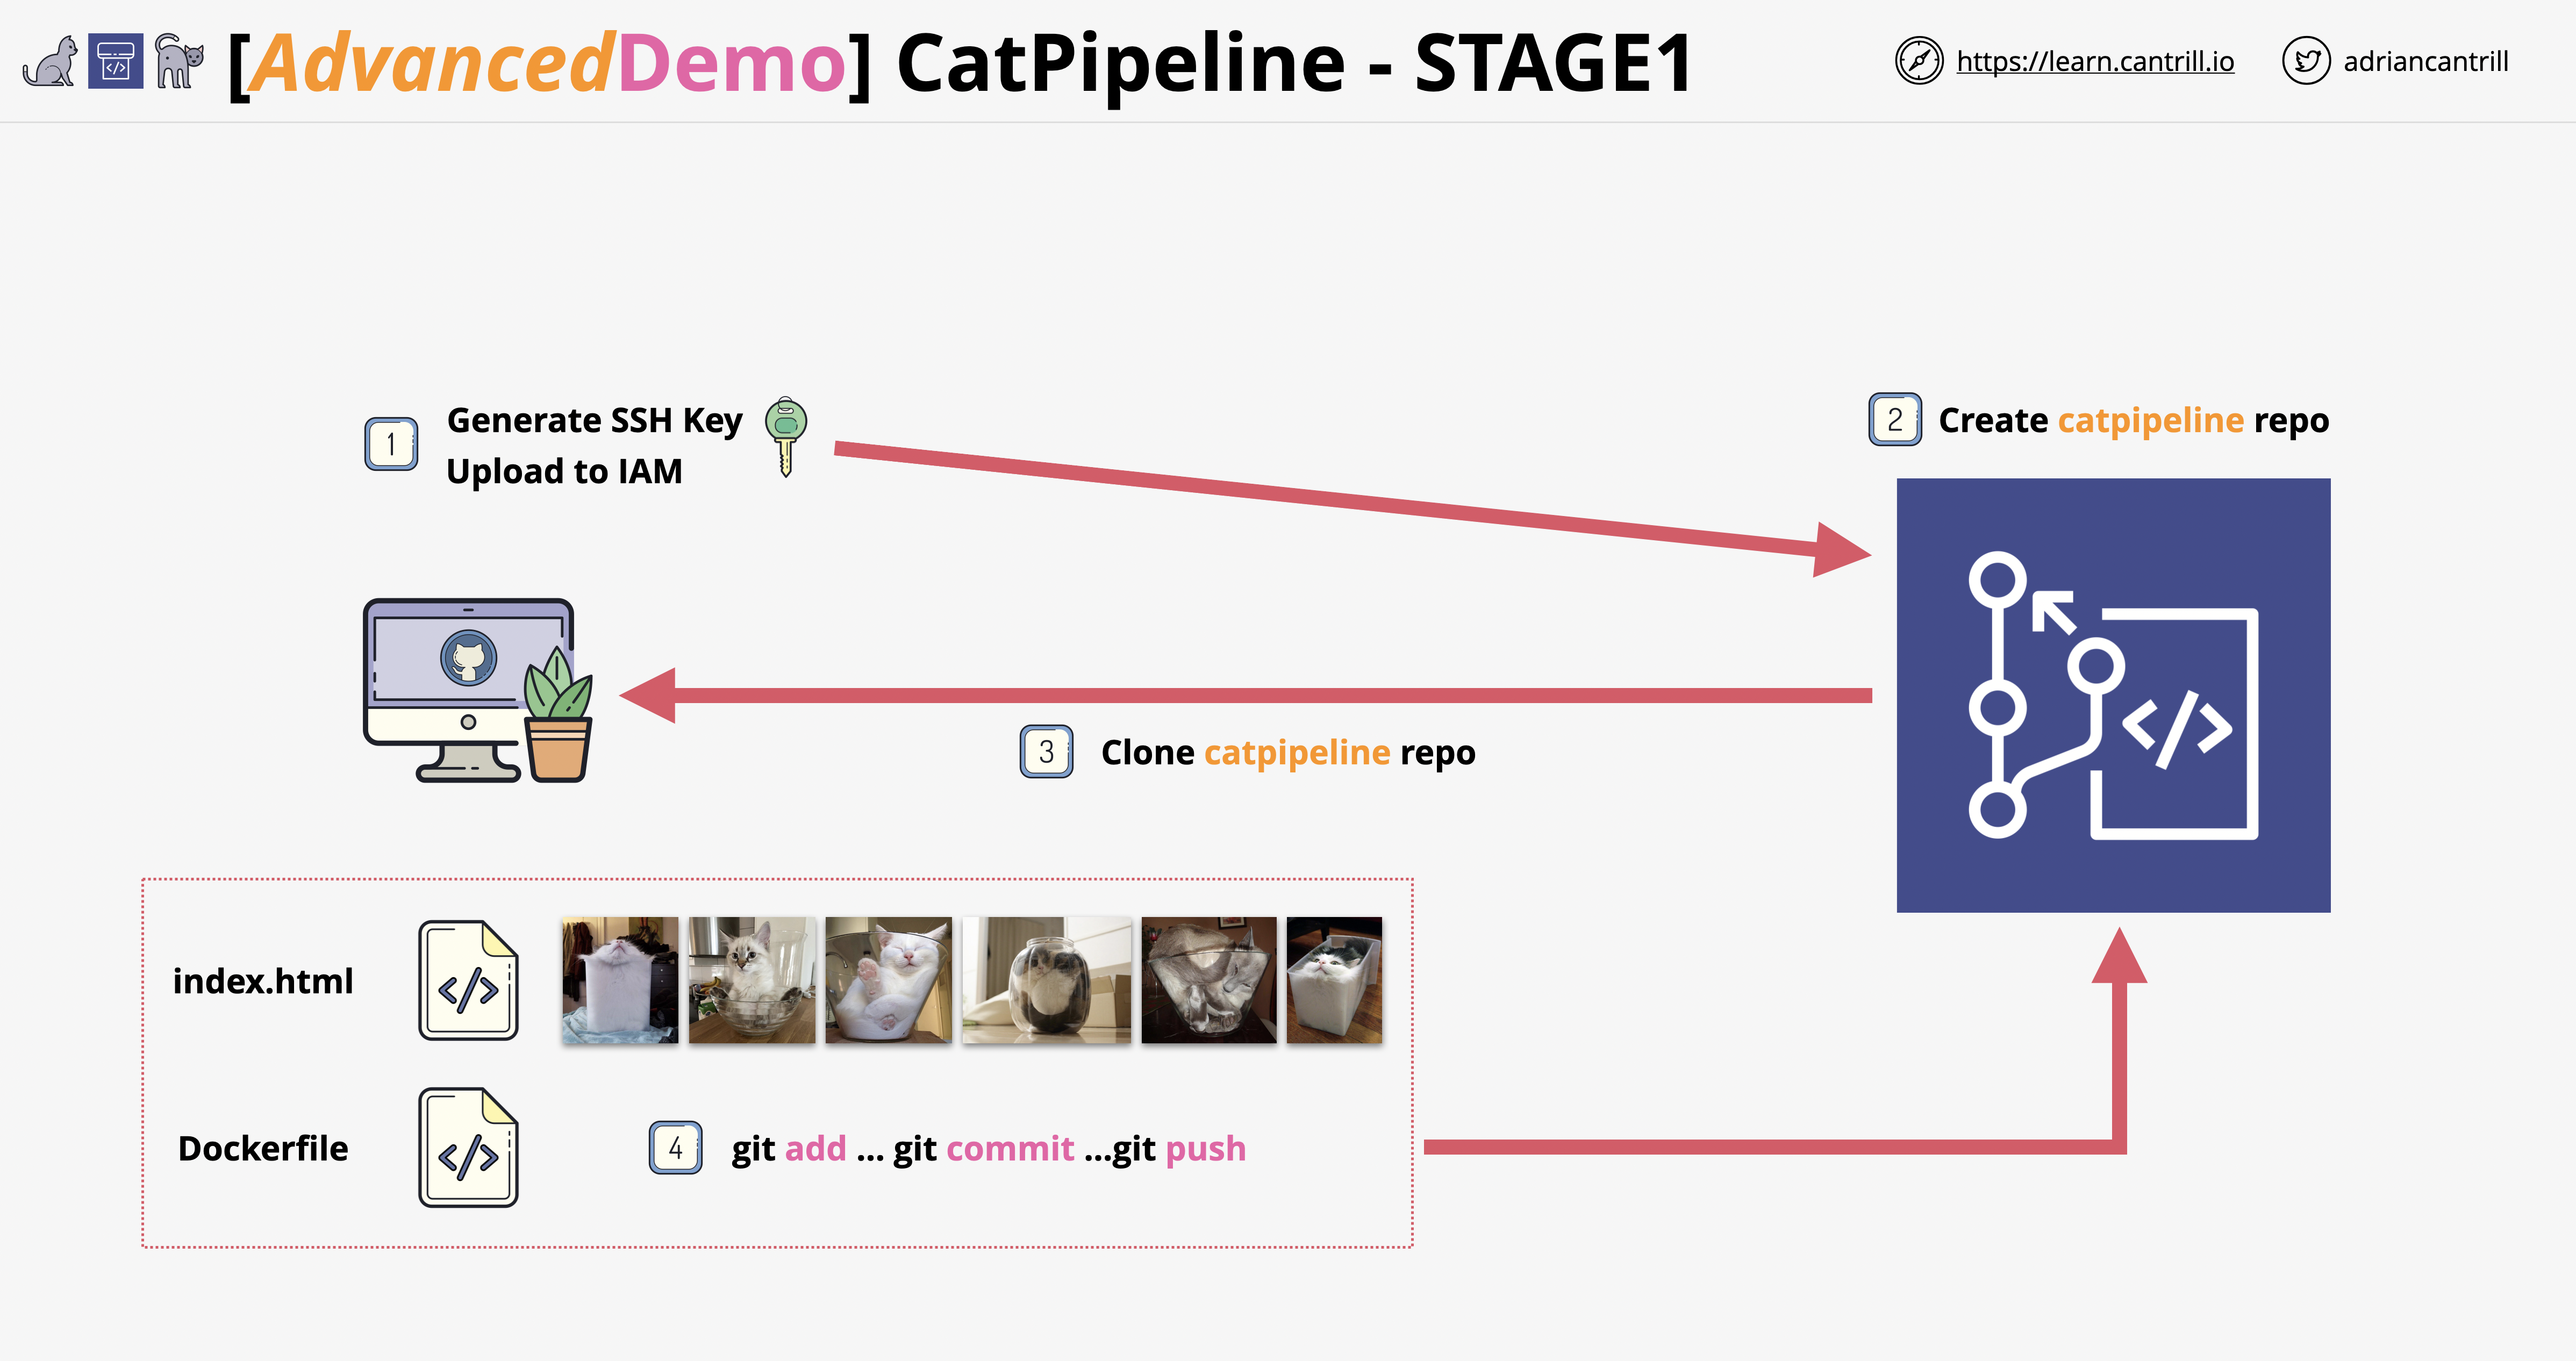 catpipeline-arch-stage1.png